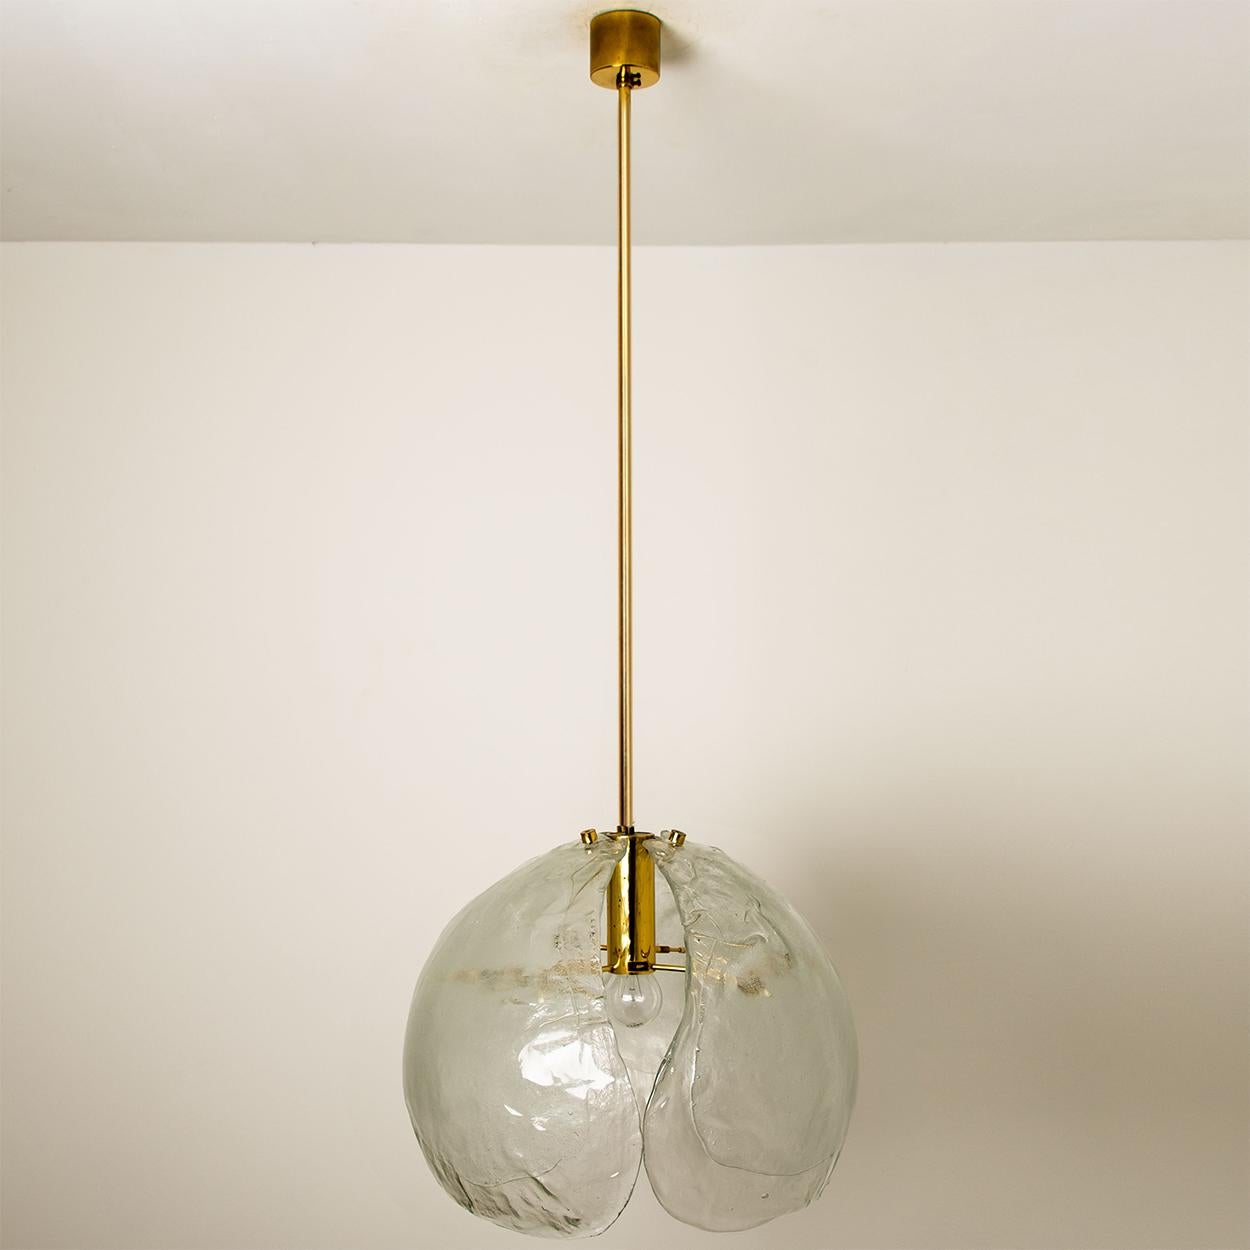 1 of the 2 Kalmar Style Pendant Lights, Clear Glass and Brass, 1970s For Sale 1